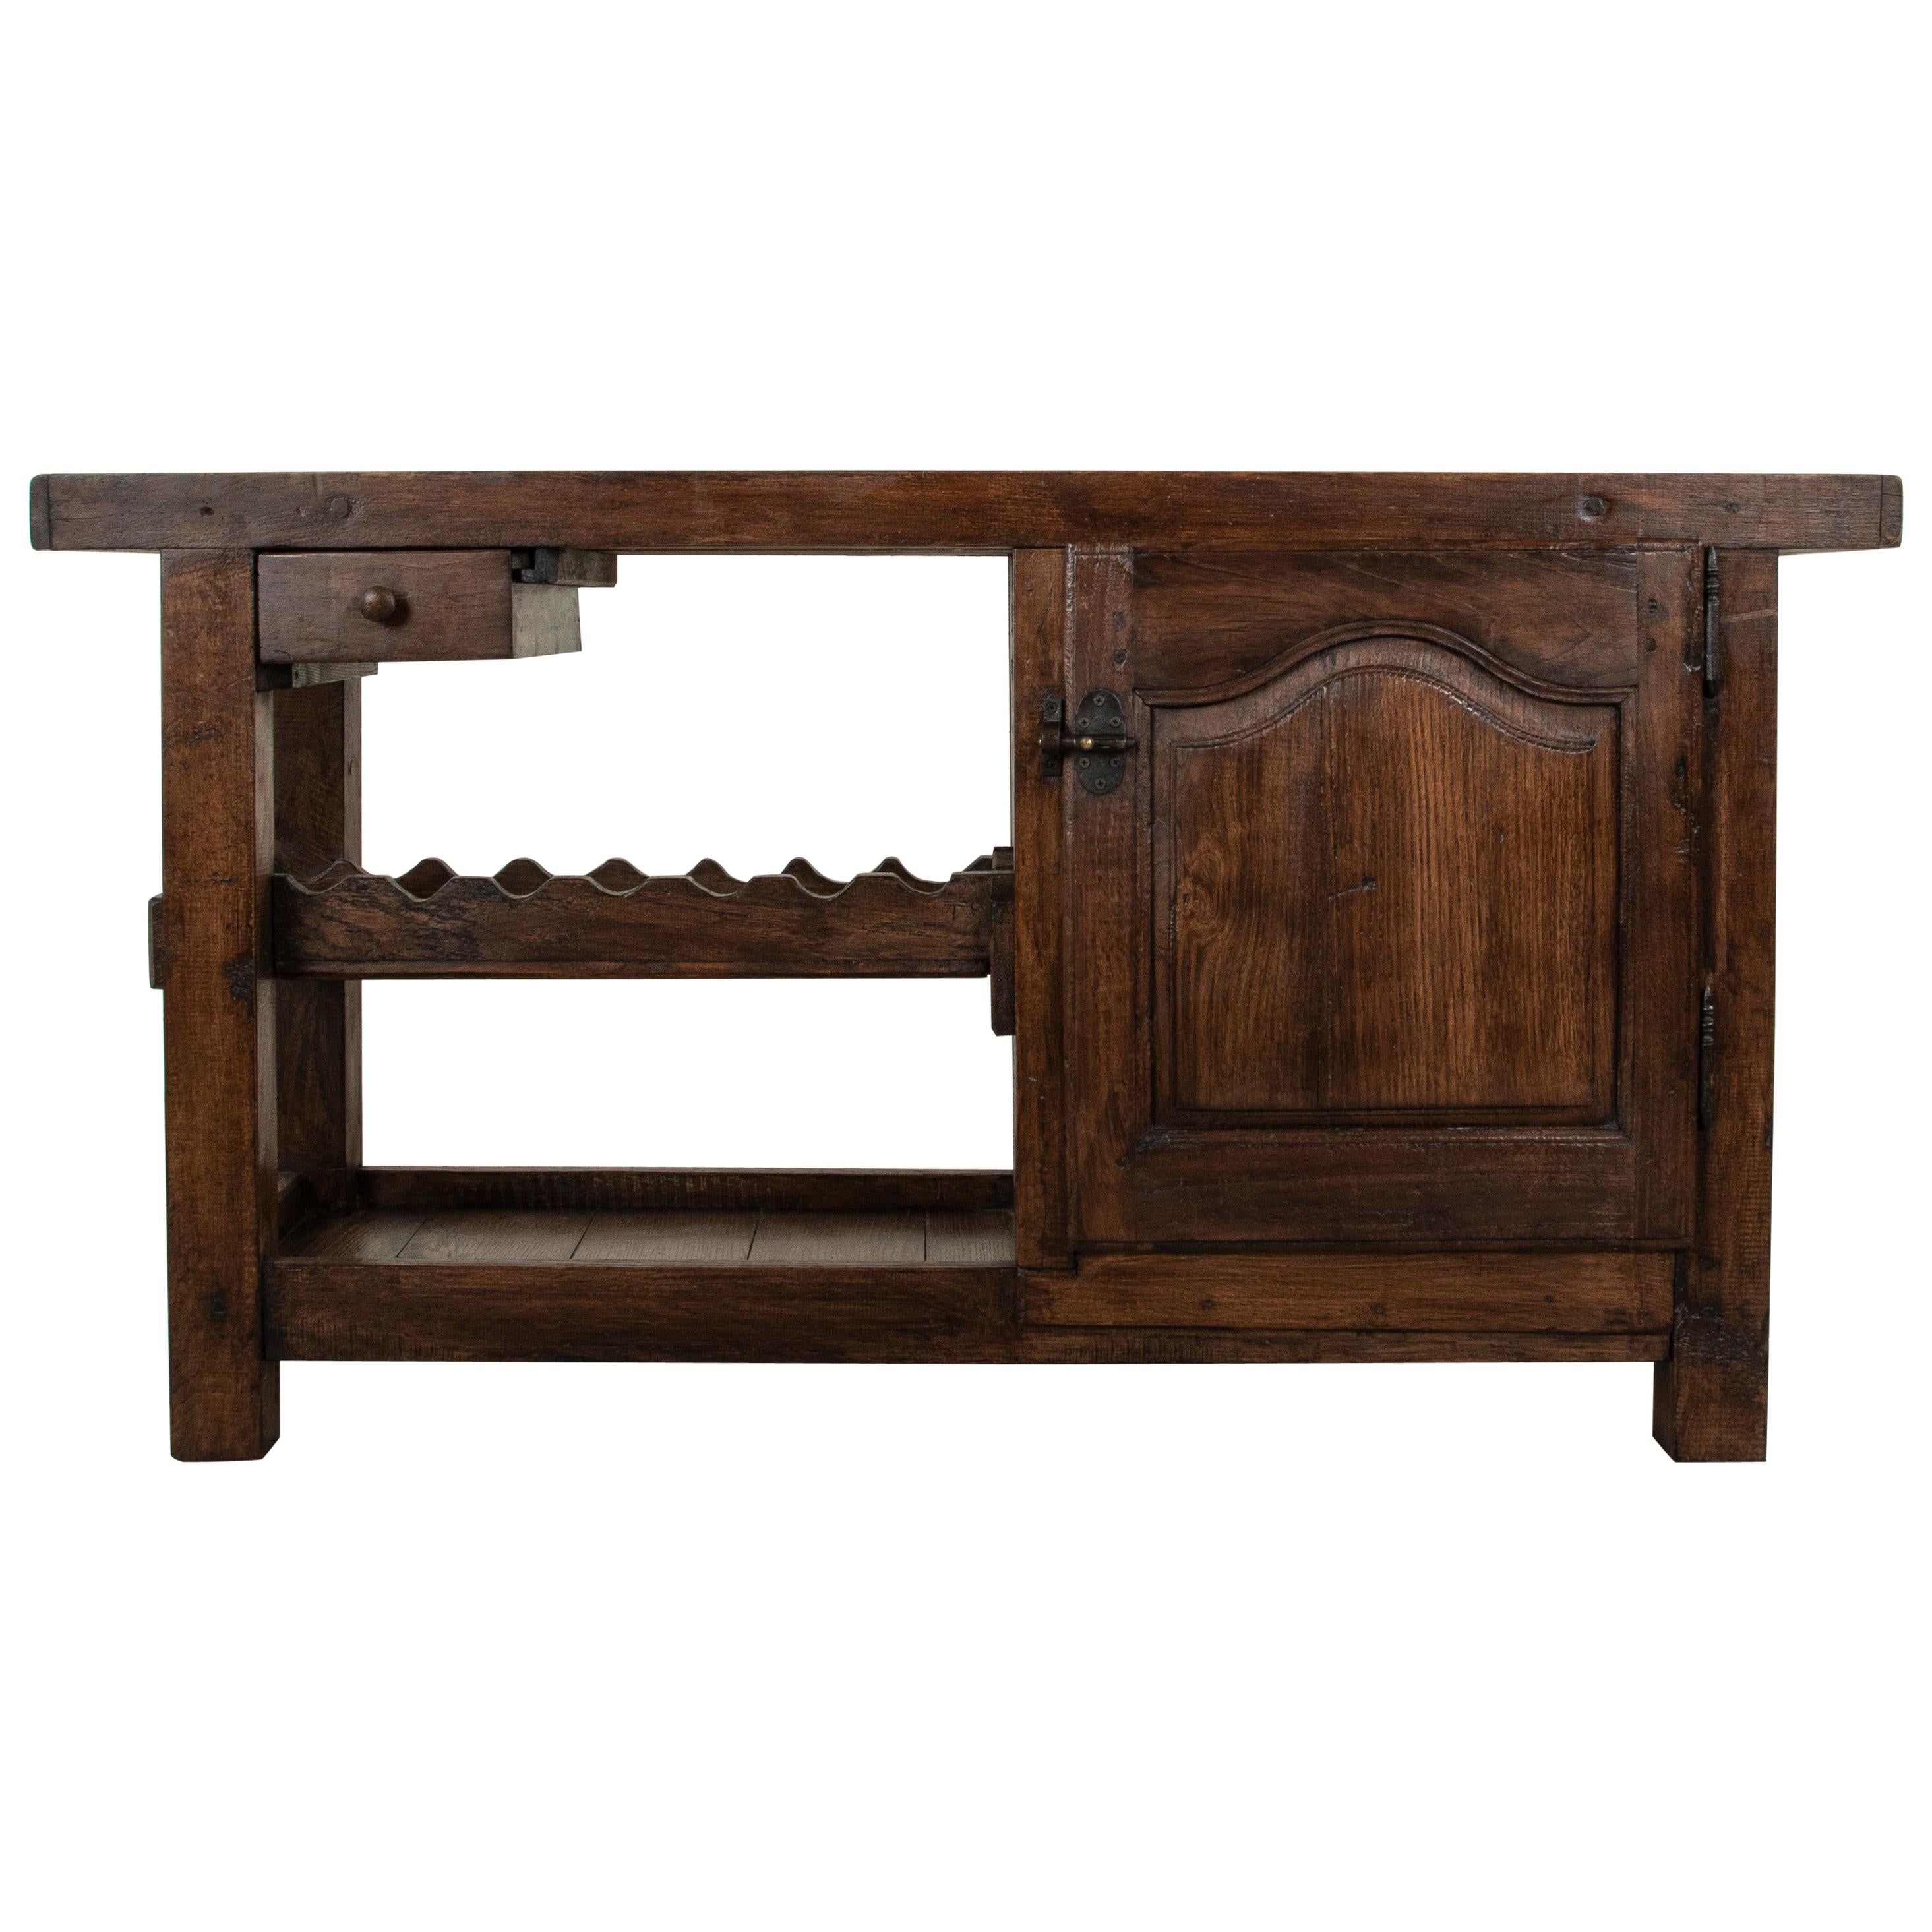 Early 20th Century French Oak Workbench, Console, Sofa Table, Dry Bar